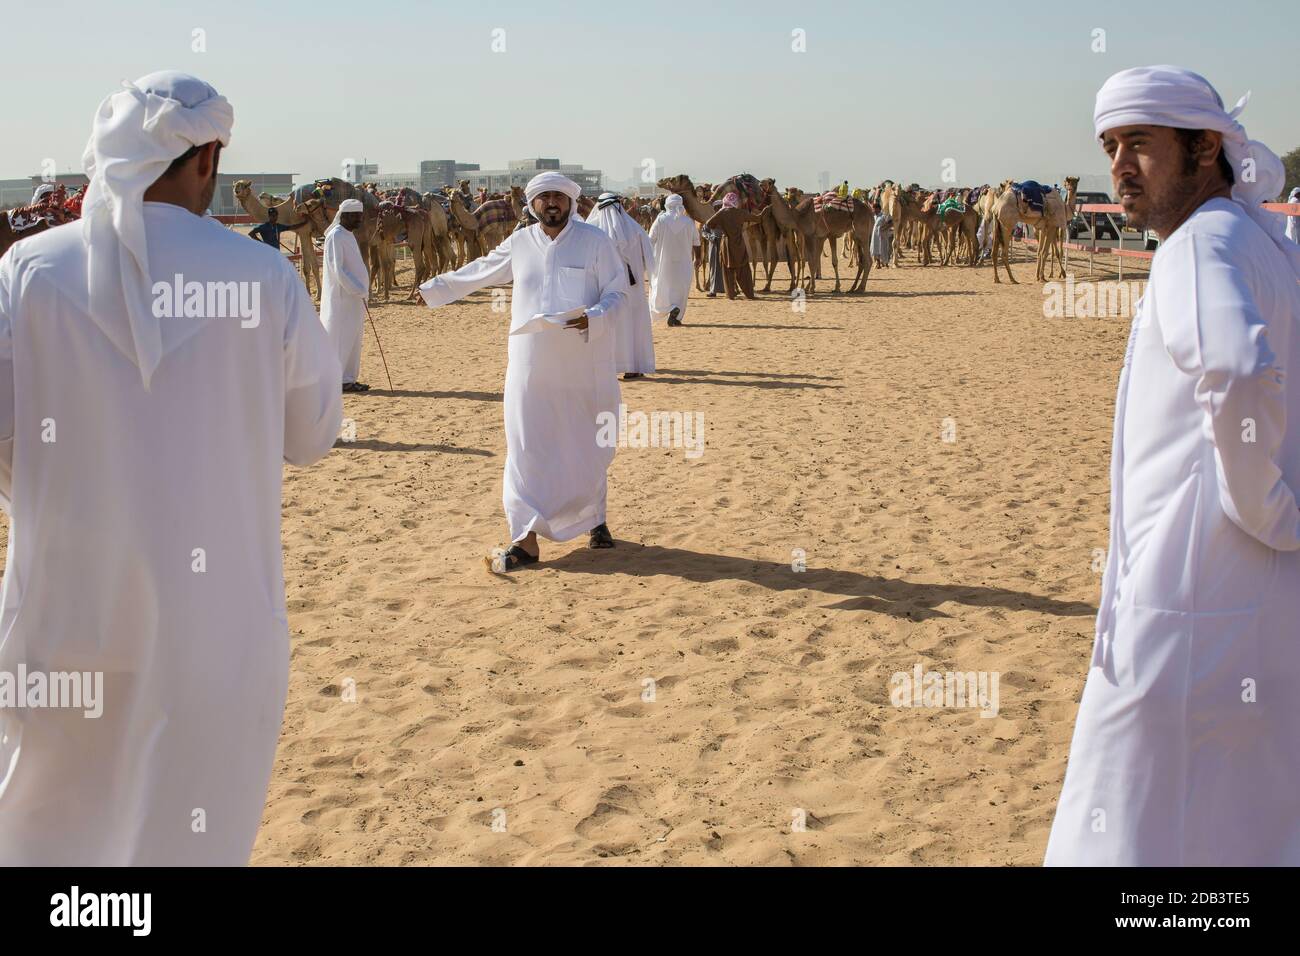 United Arab Emirates / Al Dhaid / Before the race the Camel is getting registerd . Stock Photo